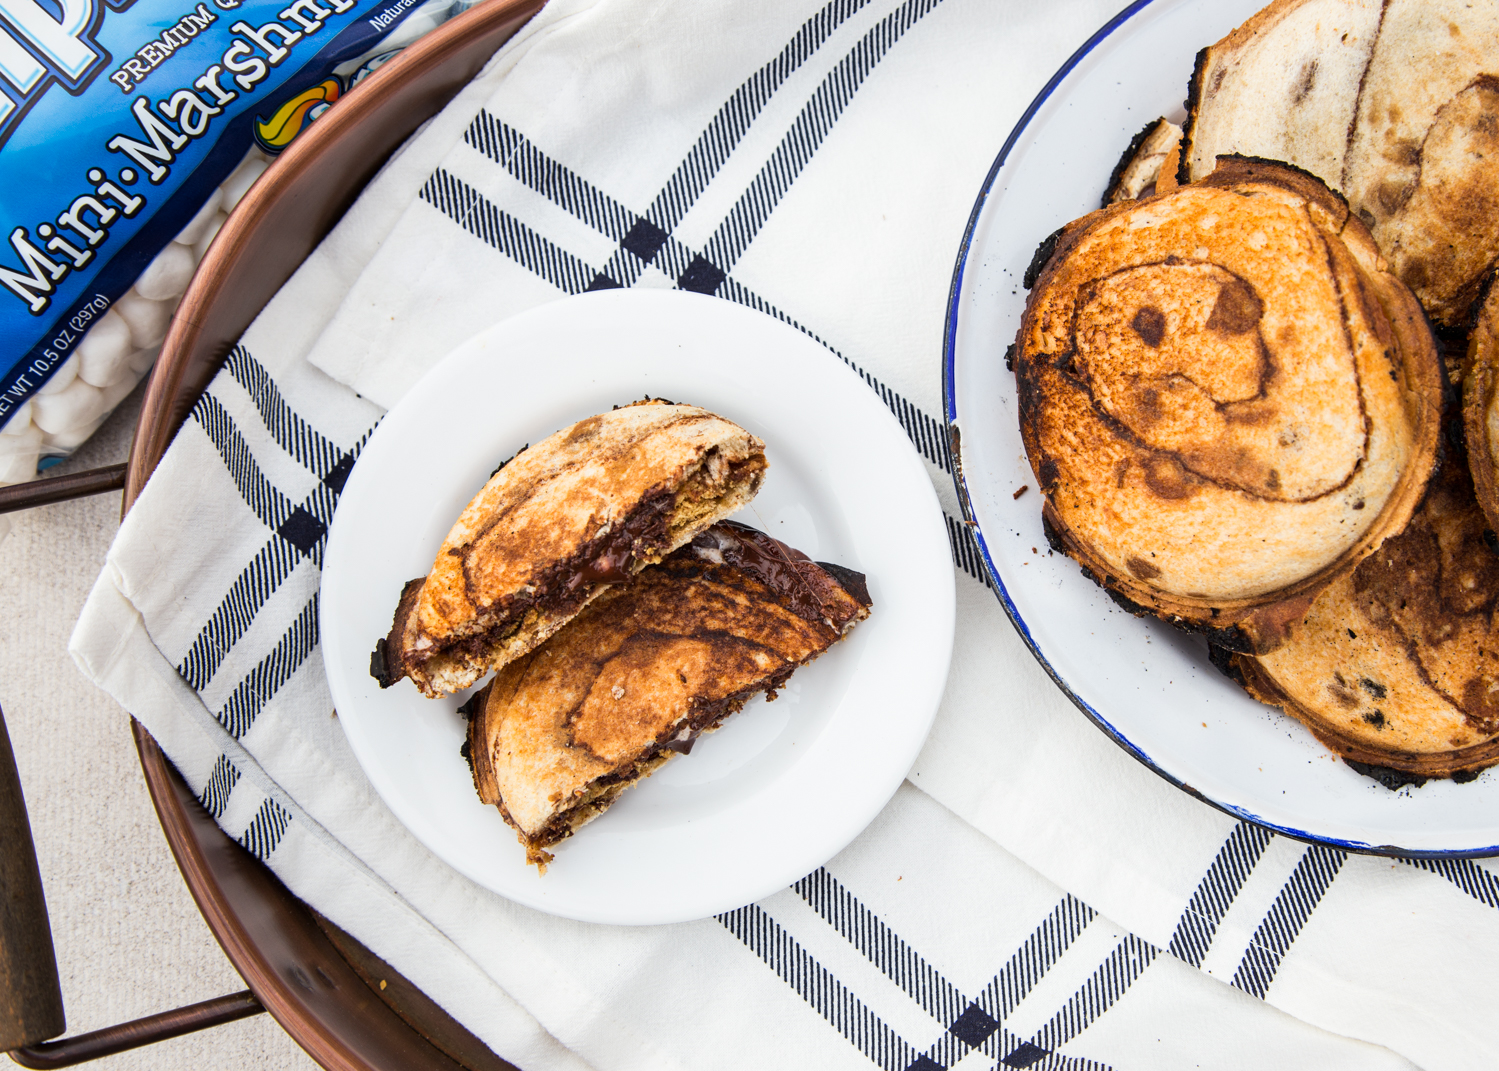 S'mores Pudgy Pies are an awesome campfire dessert!